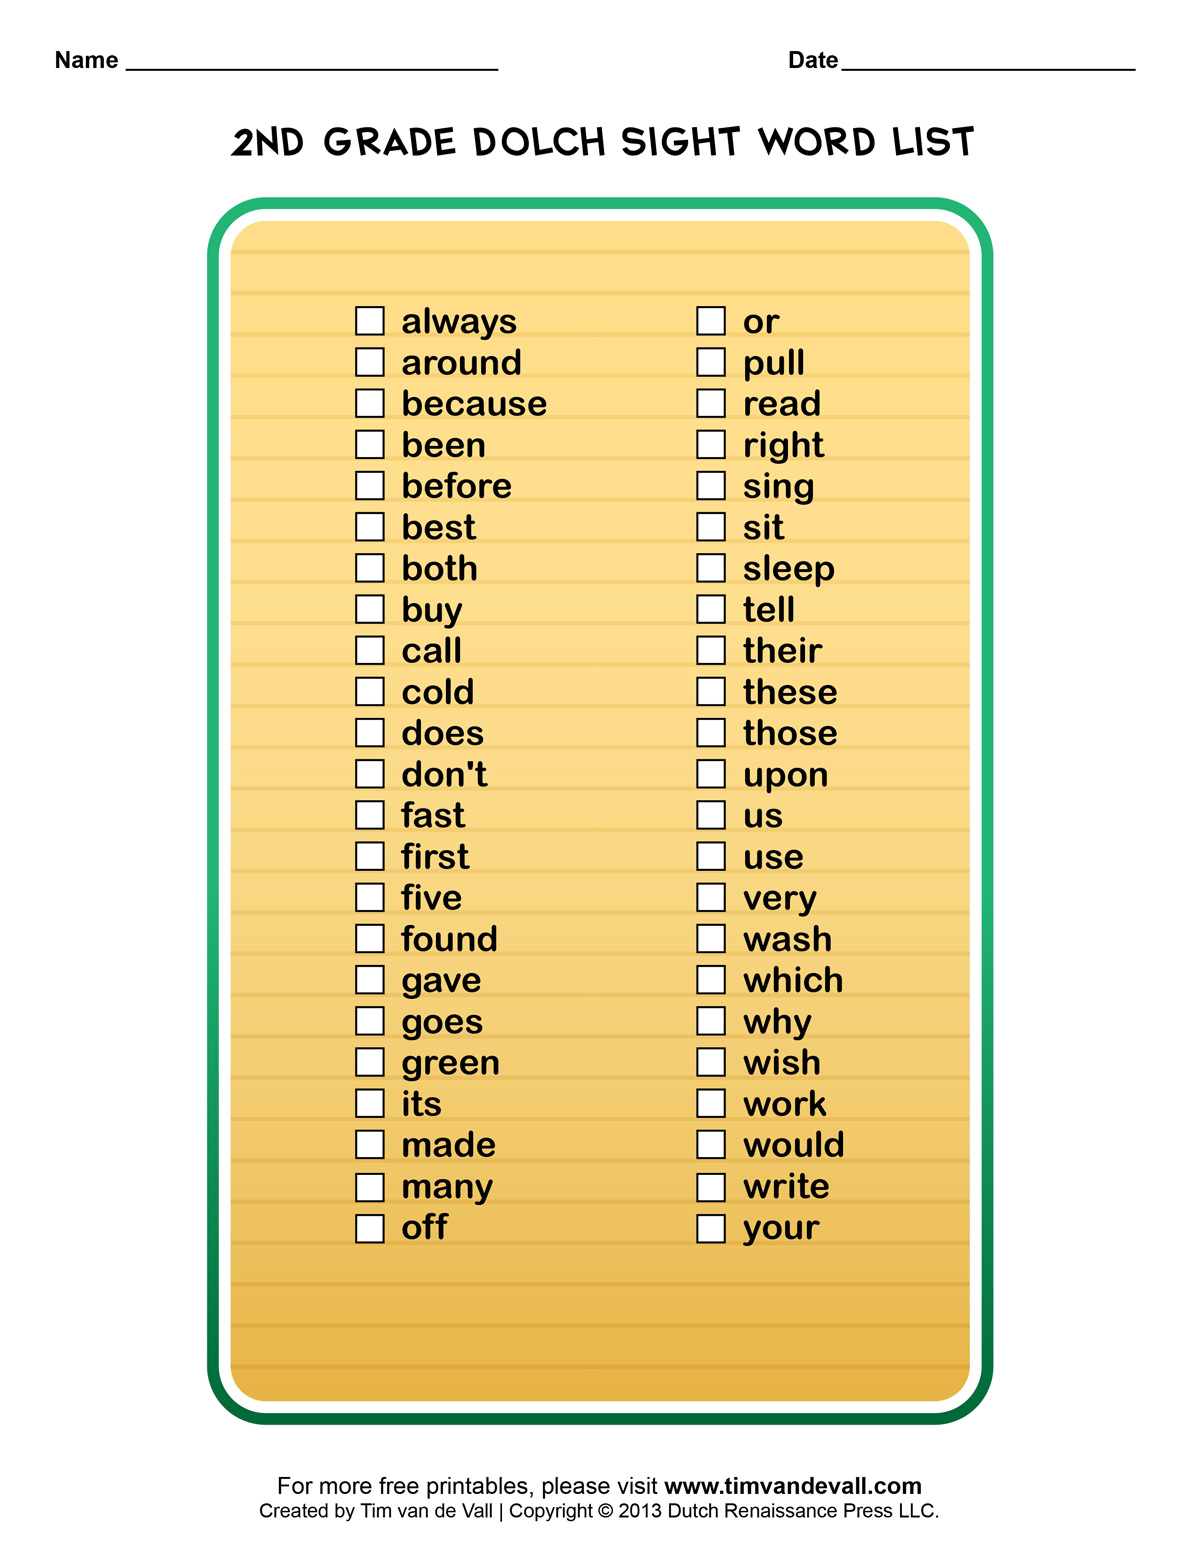 2nd-grade-dolch-sight-word-list-printable